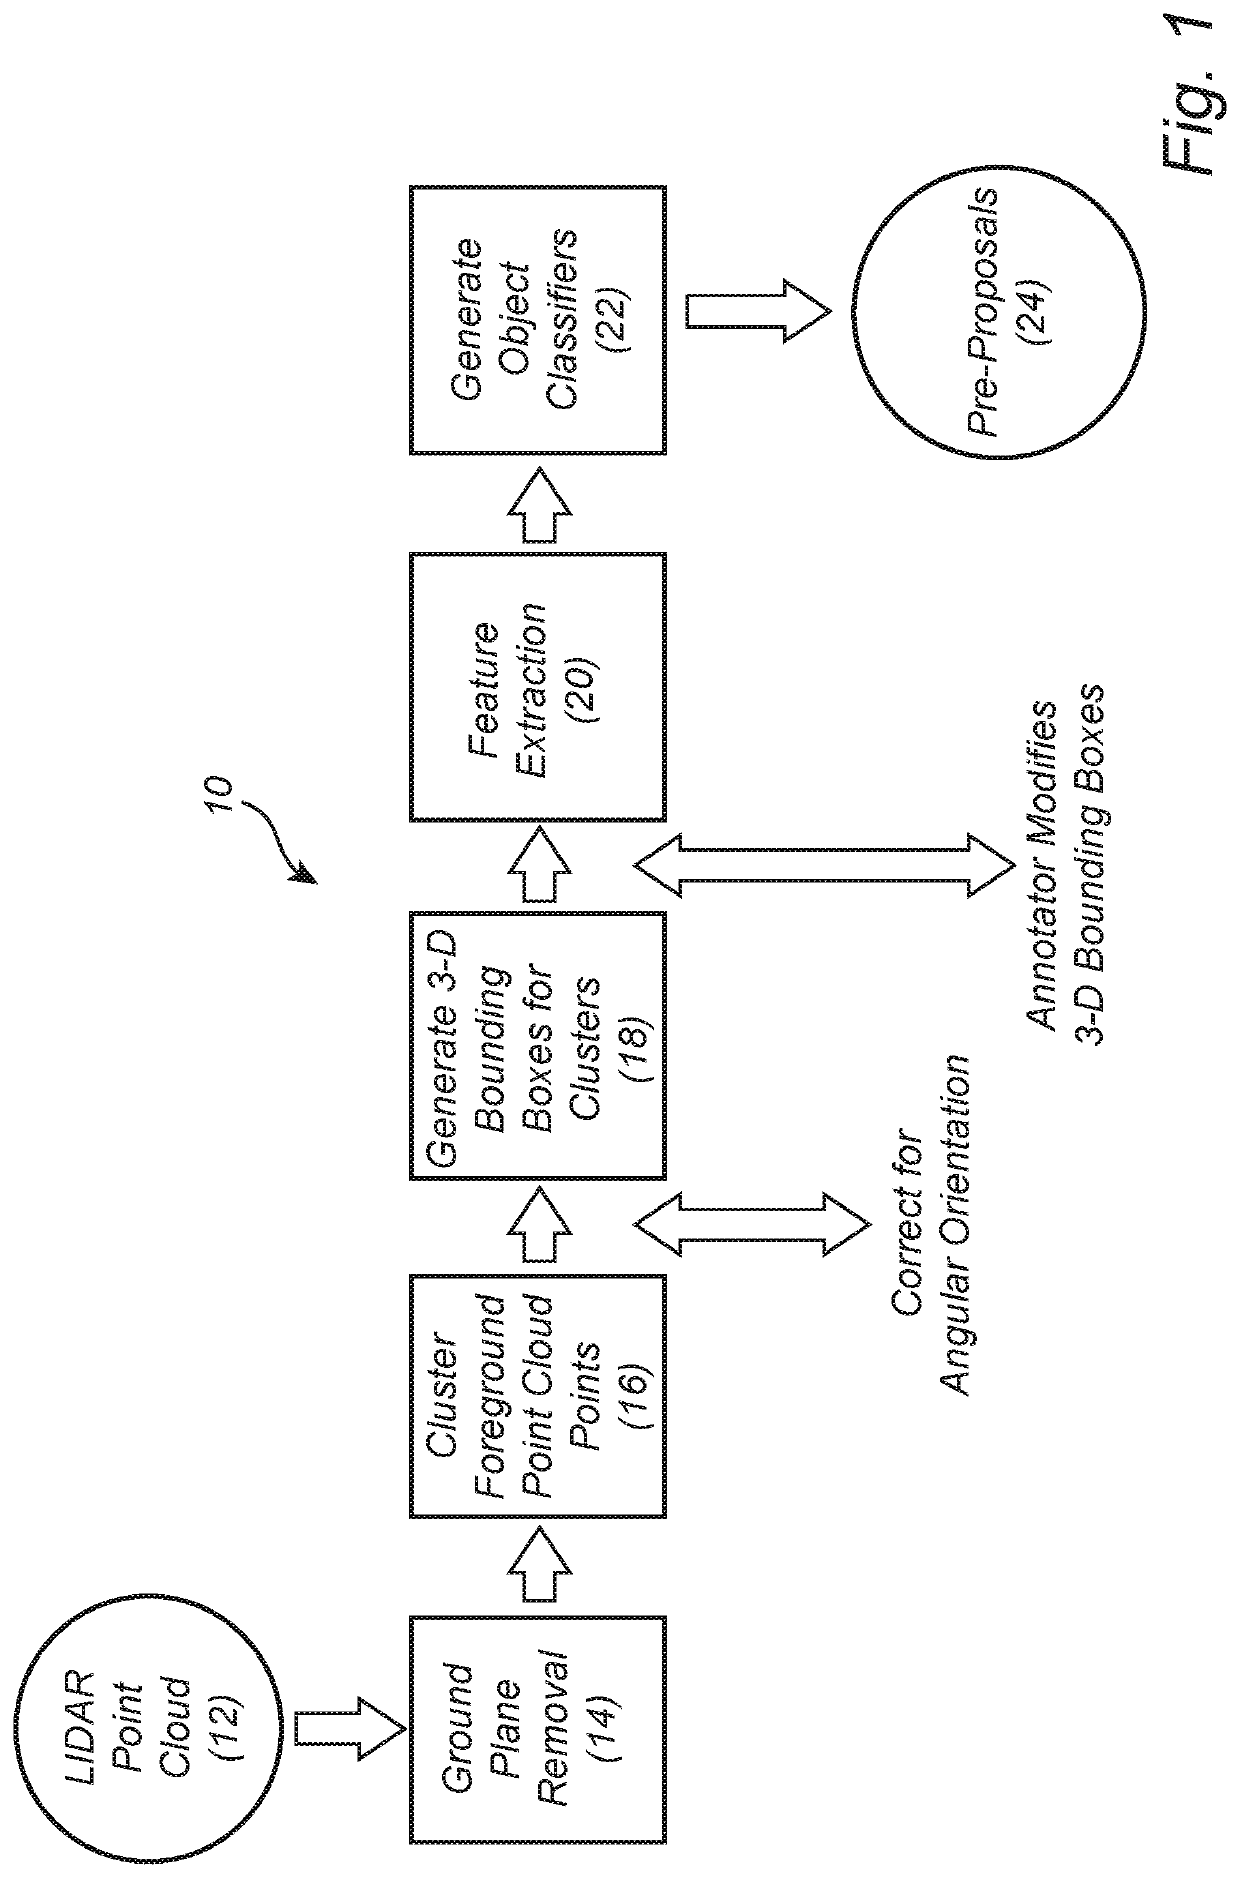 Methods and systems for the fast estimation of three-dimensional bounding boxes and drivable surfaces using lidar point clouds